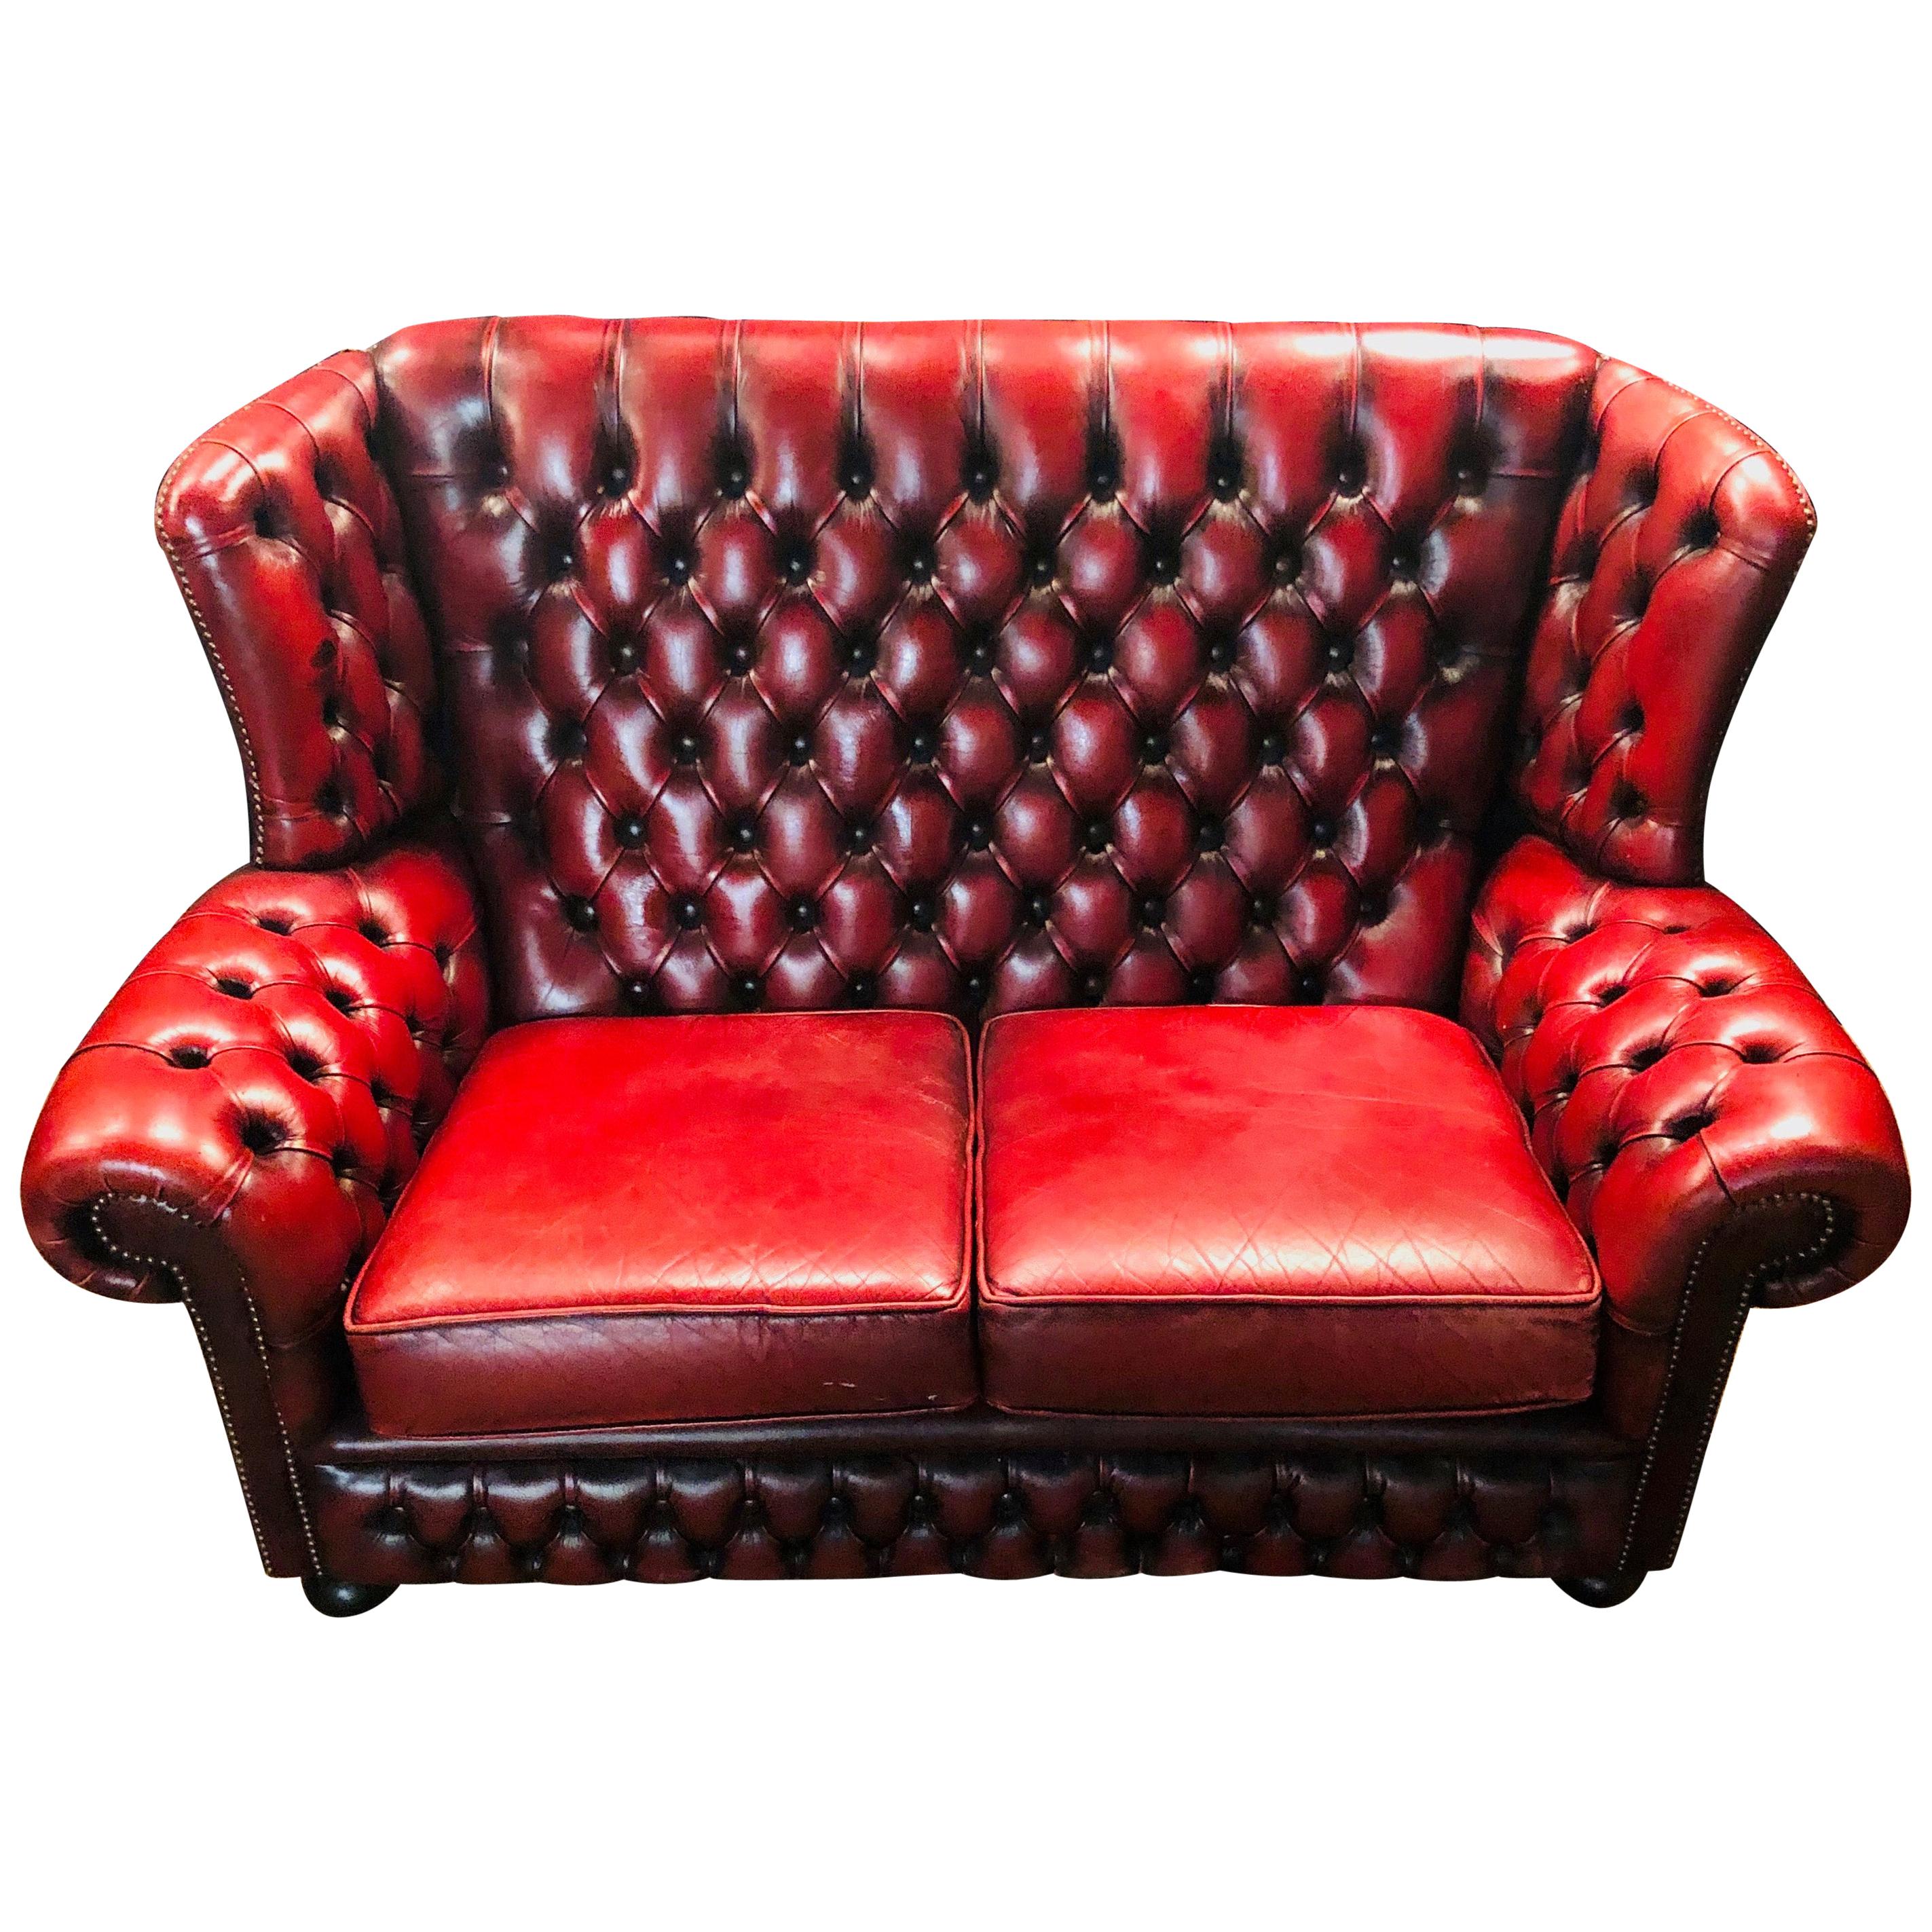 Vintage Bordeau Leather Chesterfield Tufted Wingback Two-Seat Sofa